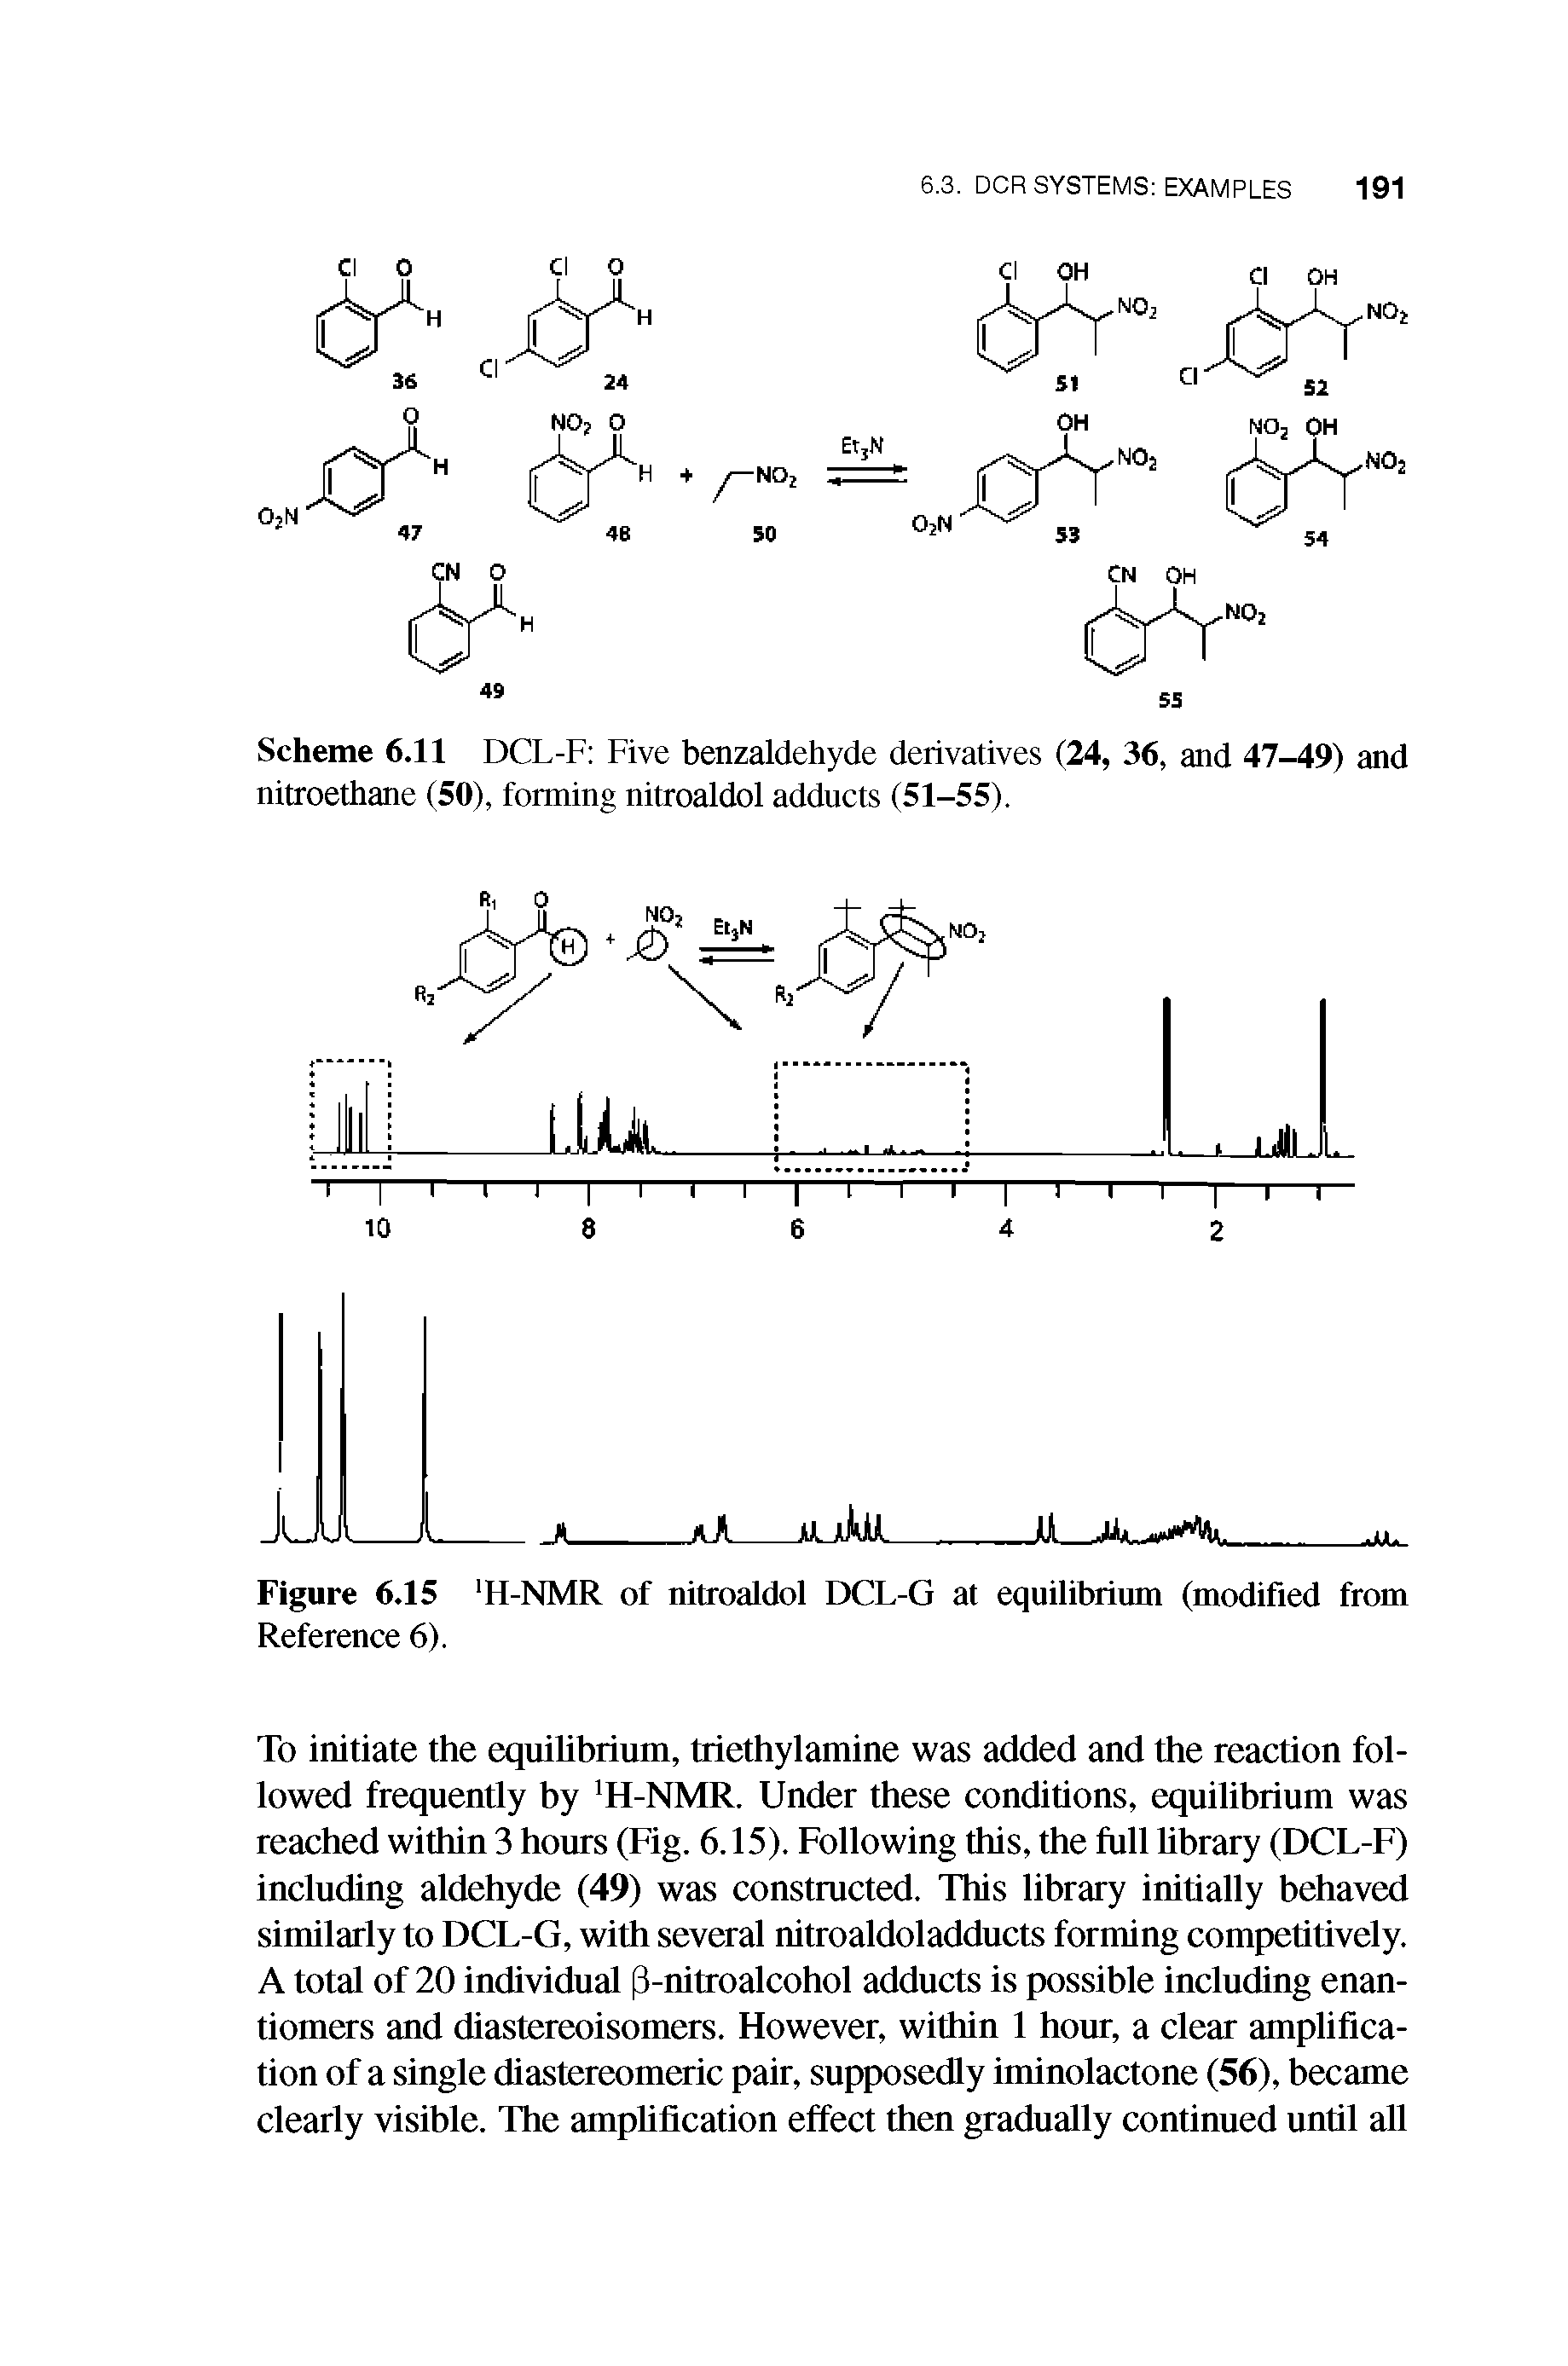 Scheme 6.11 DCL-F Five benzaldehyde derivatives (24, 36, and 47-49) and nitroethane (50), forming nitroaldol adducts (51-55).